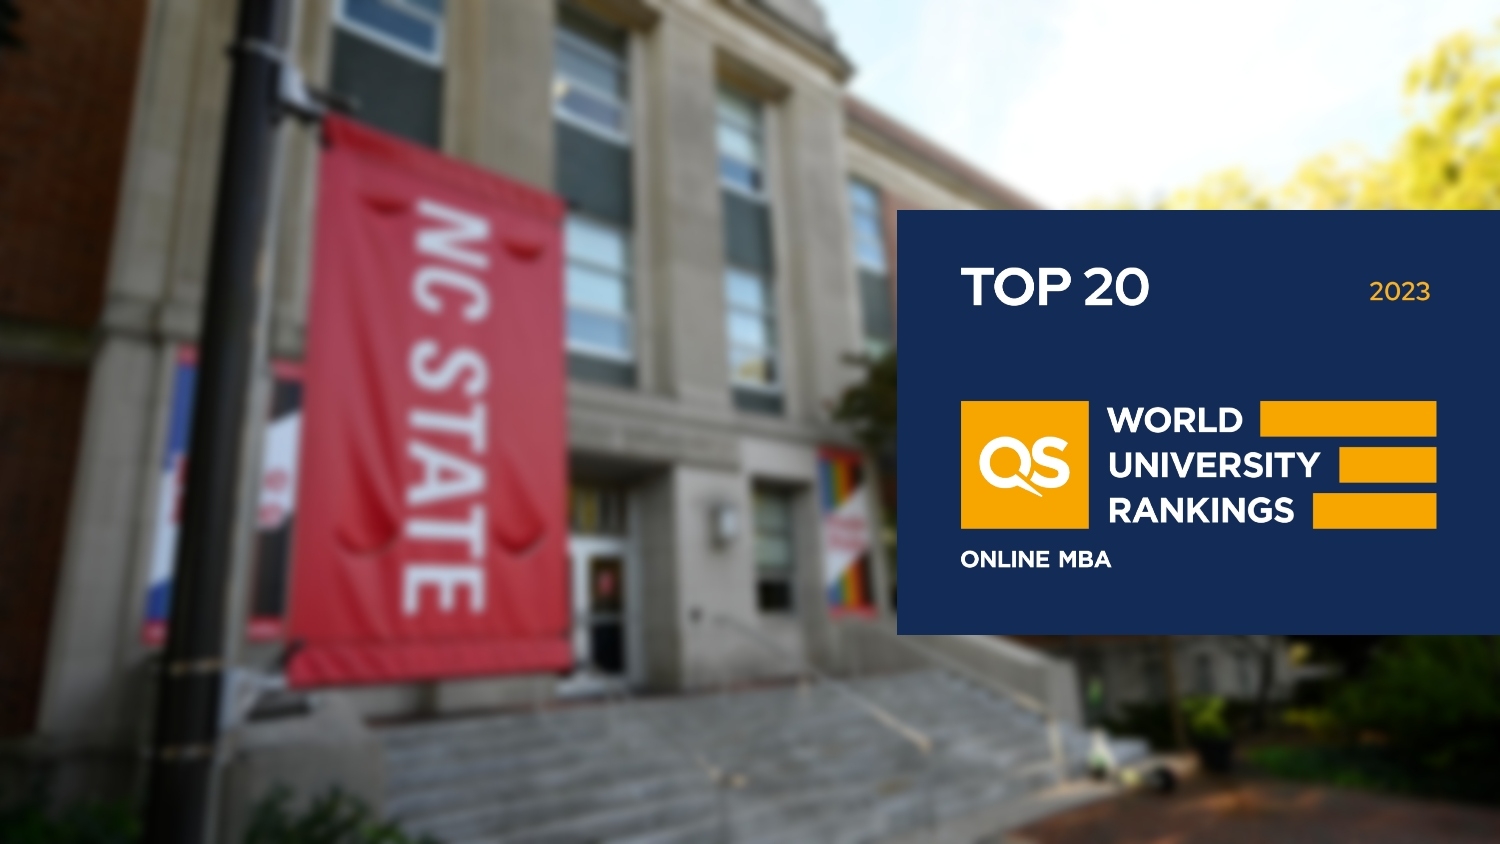 Jenkins Online MBA Ranks No. 5 in Employability, No. 20 Overall in 2023